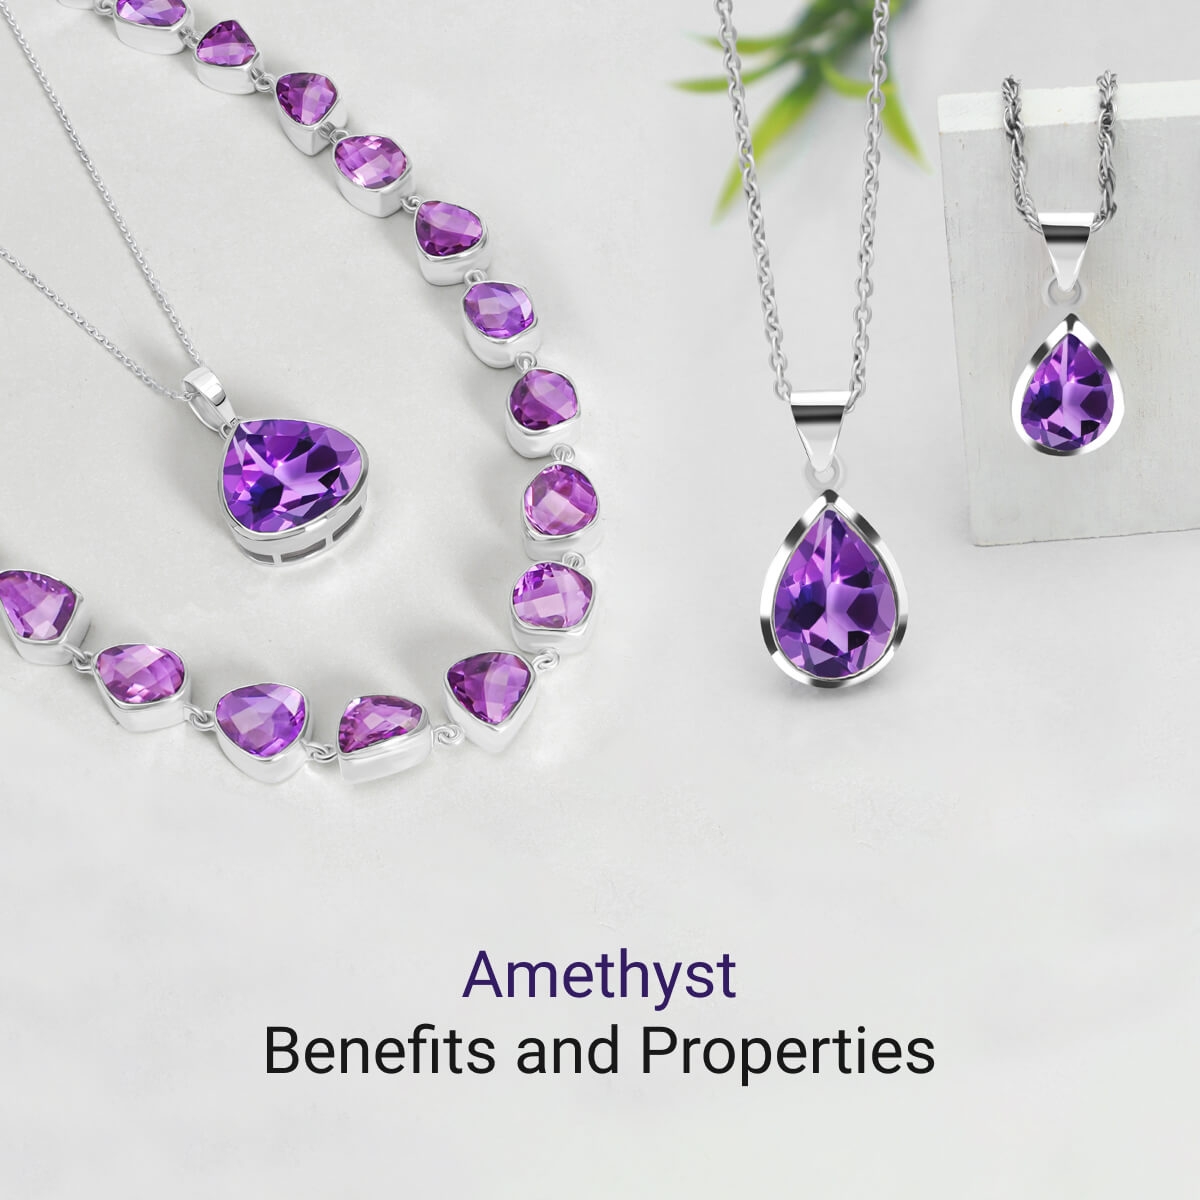 What are the properties of Amethyst? What are its benefits?